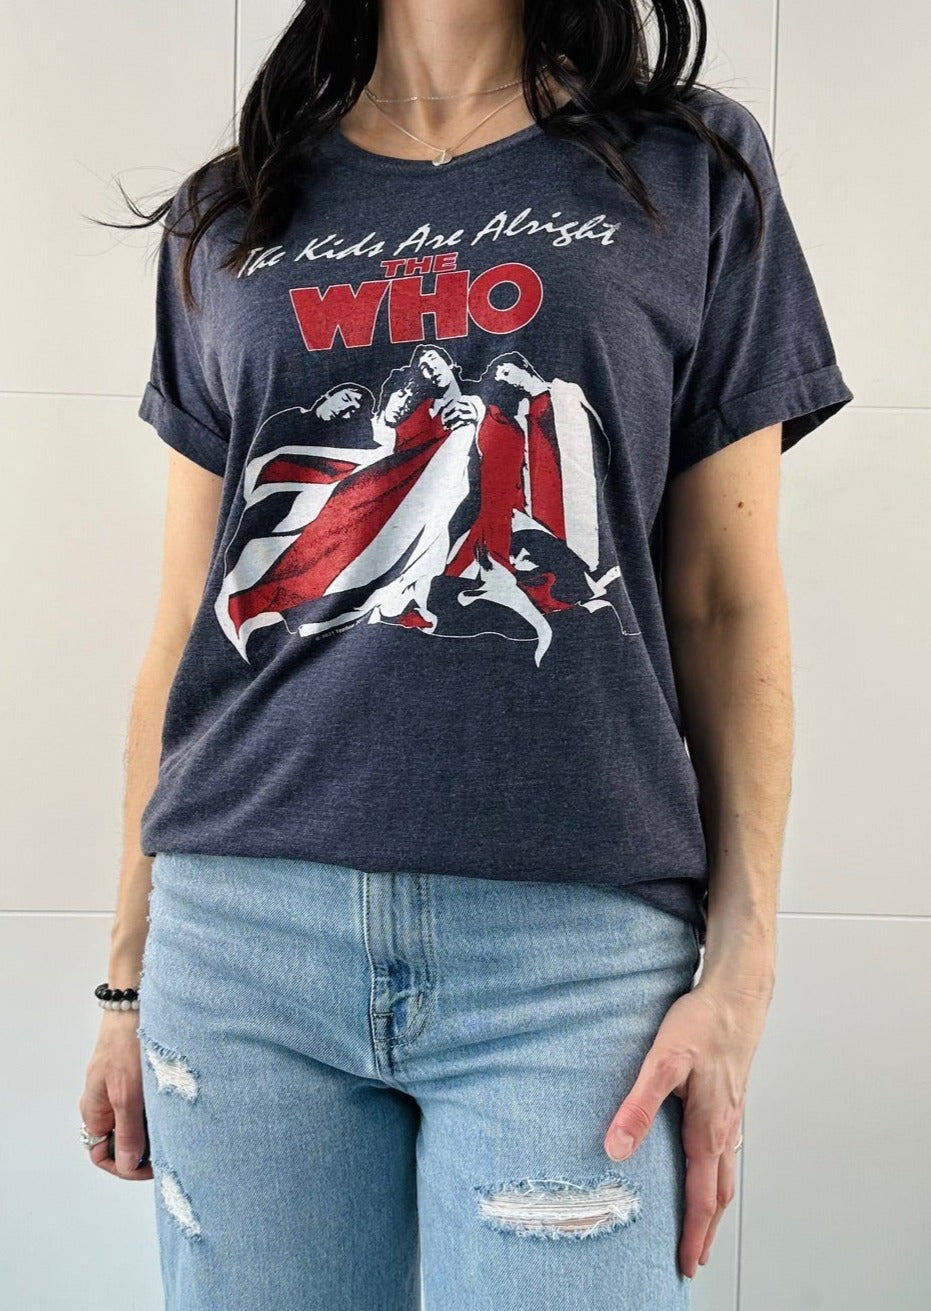 THE WHO - THE KIDS ARE ALRIGHT TEE